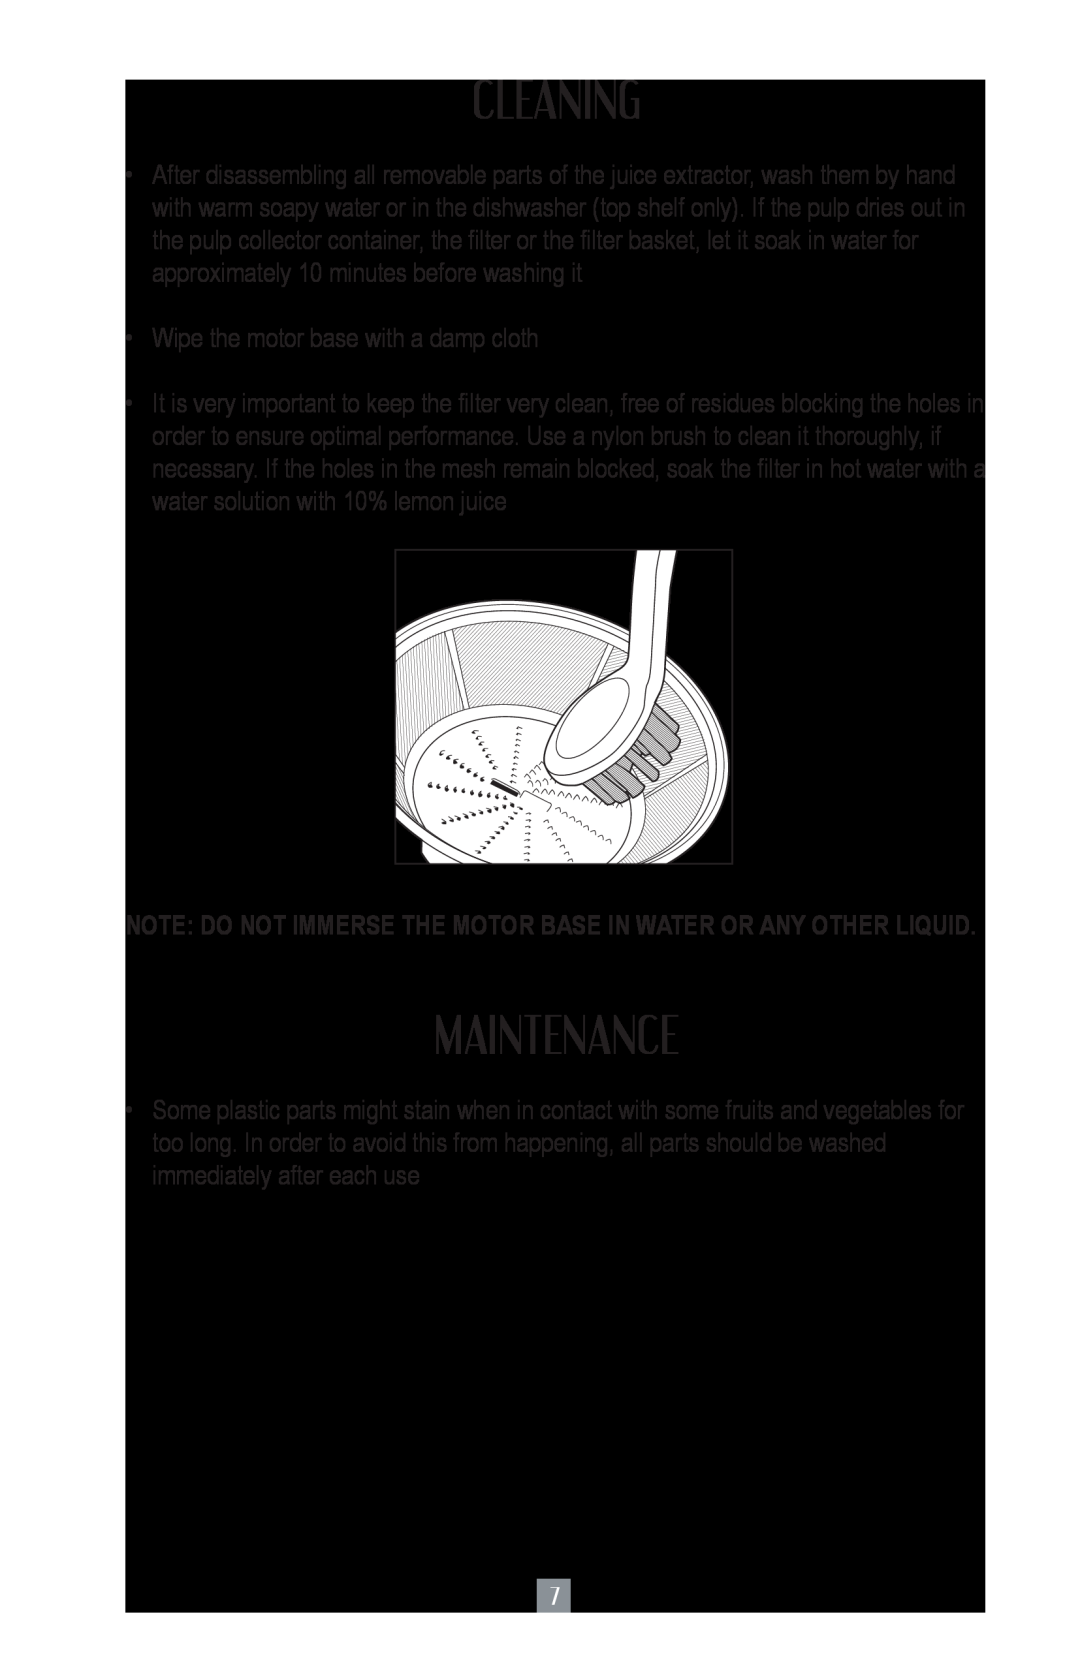 Oster 3167, 3168, JUICE EXTRACTOR user manual Cleaning, Maintenance, Wipe the motor base with a damp cloth 